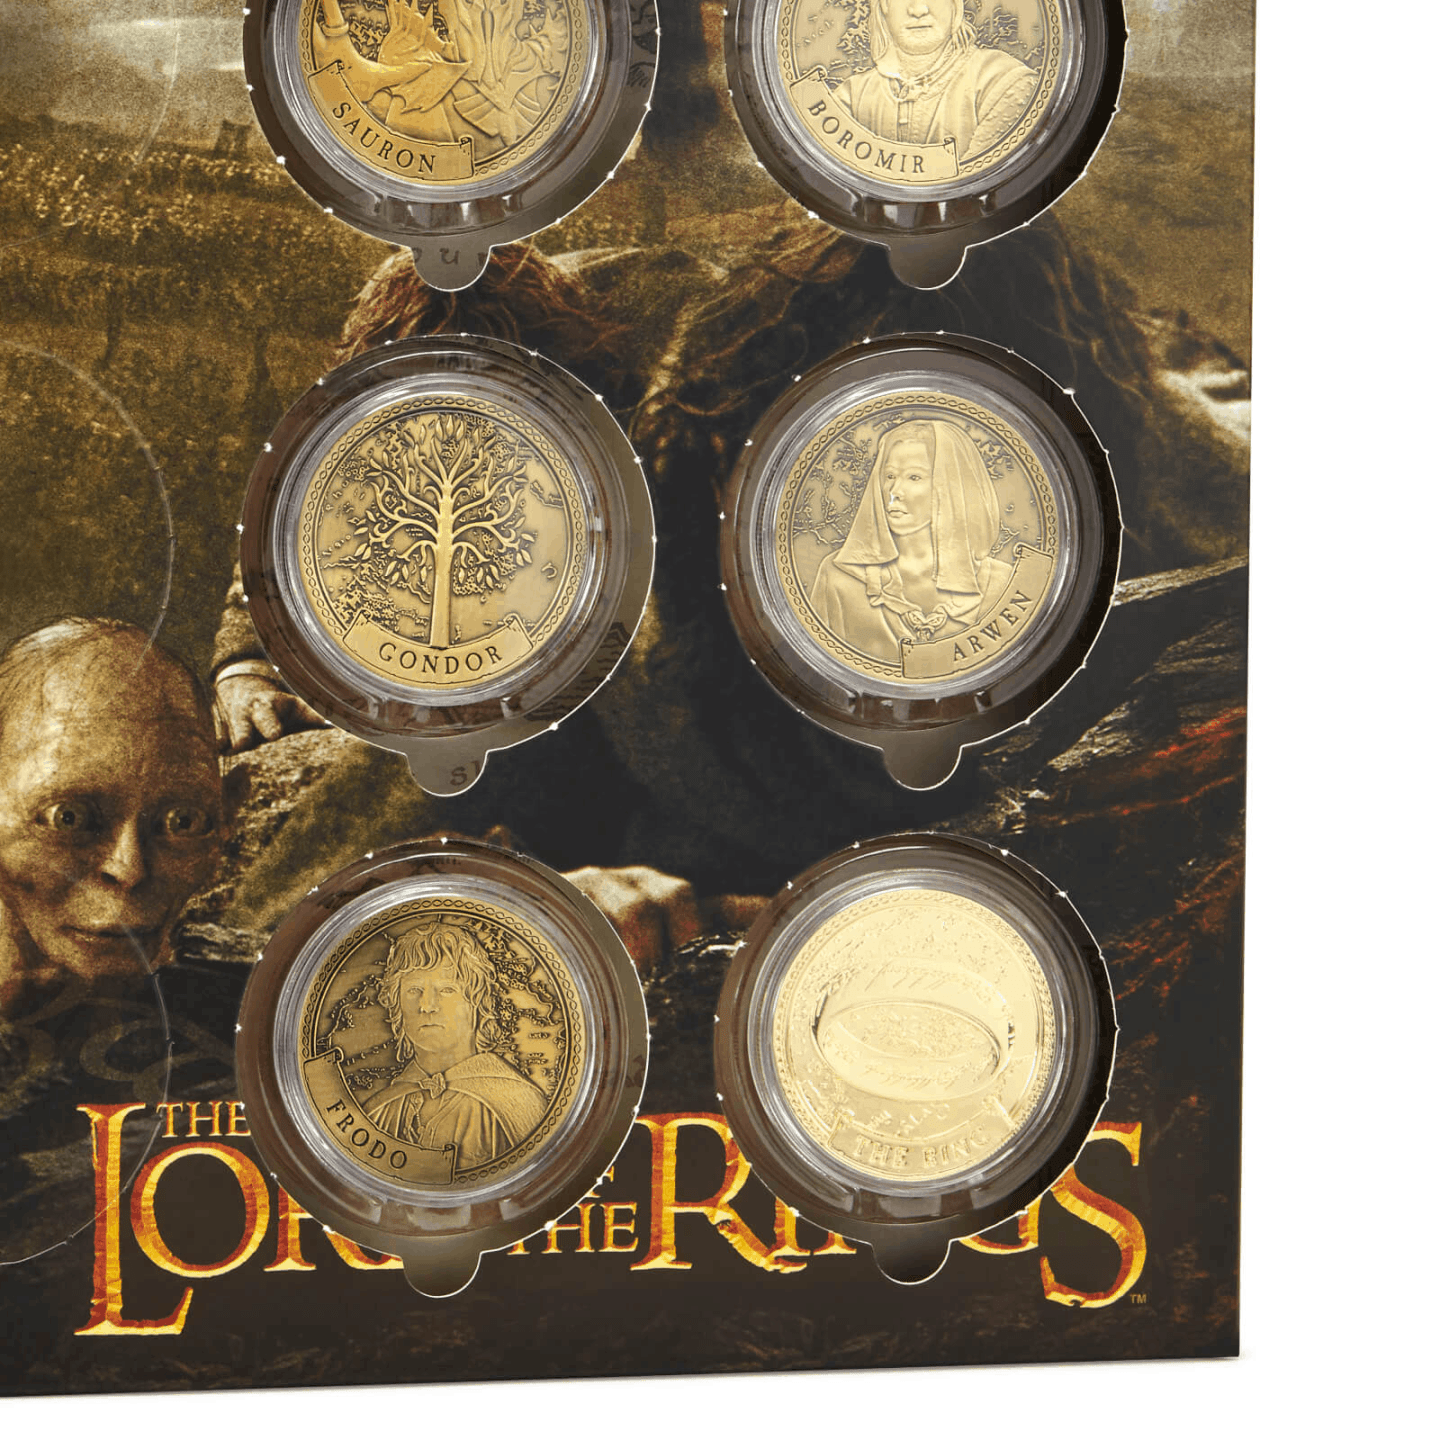 2019 Lord of the Rings Advent Calendar Available Now For Preorder